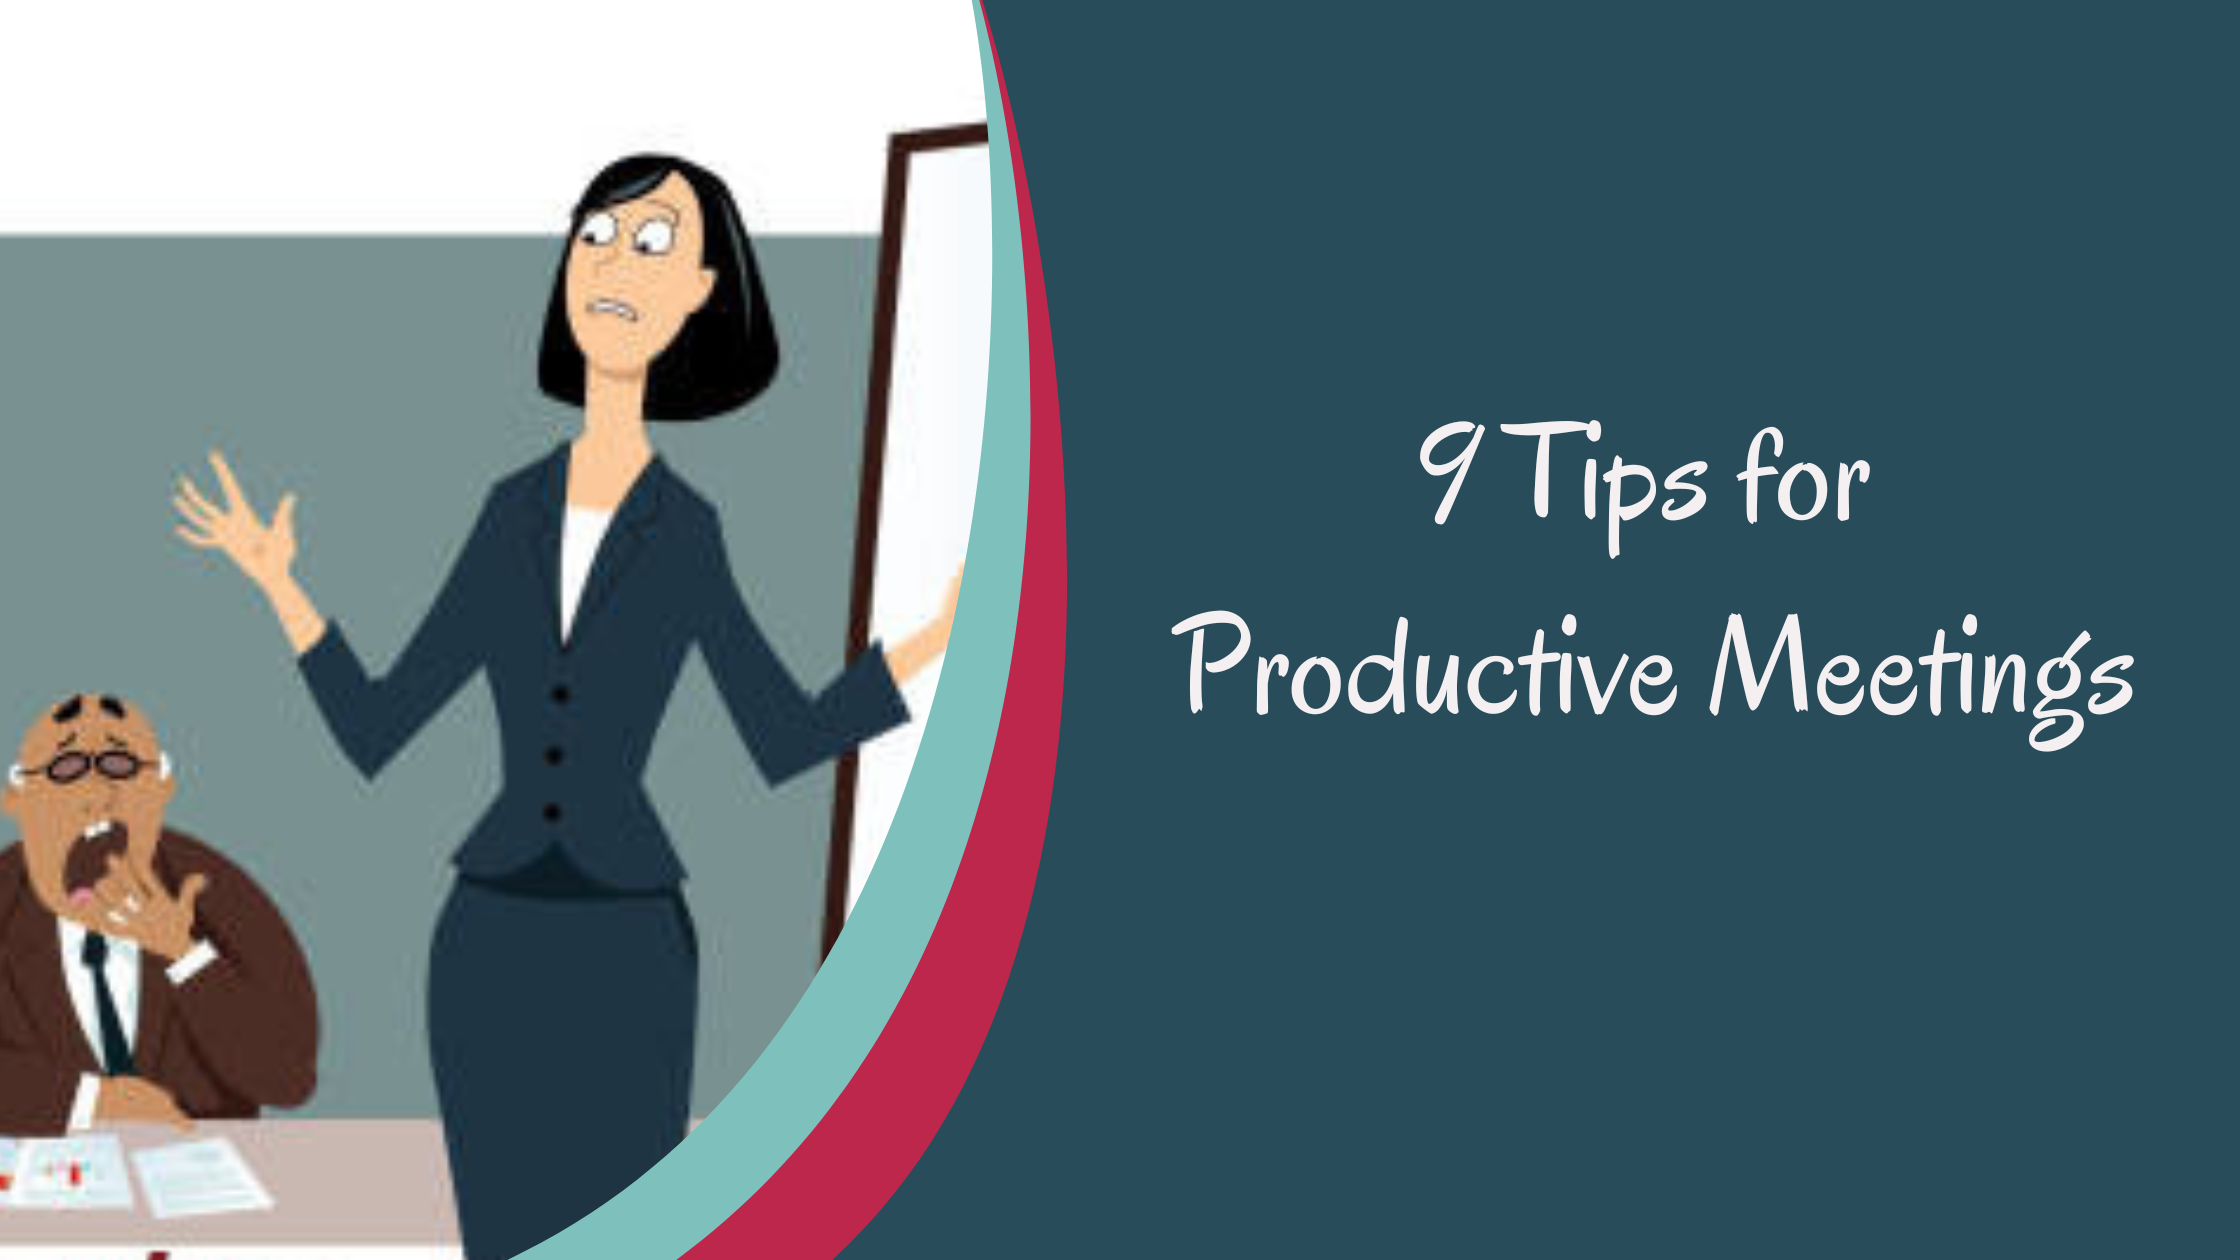 Tips for Productive Meetings